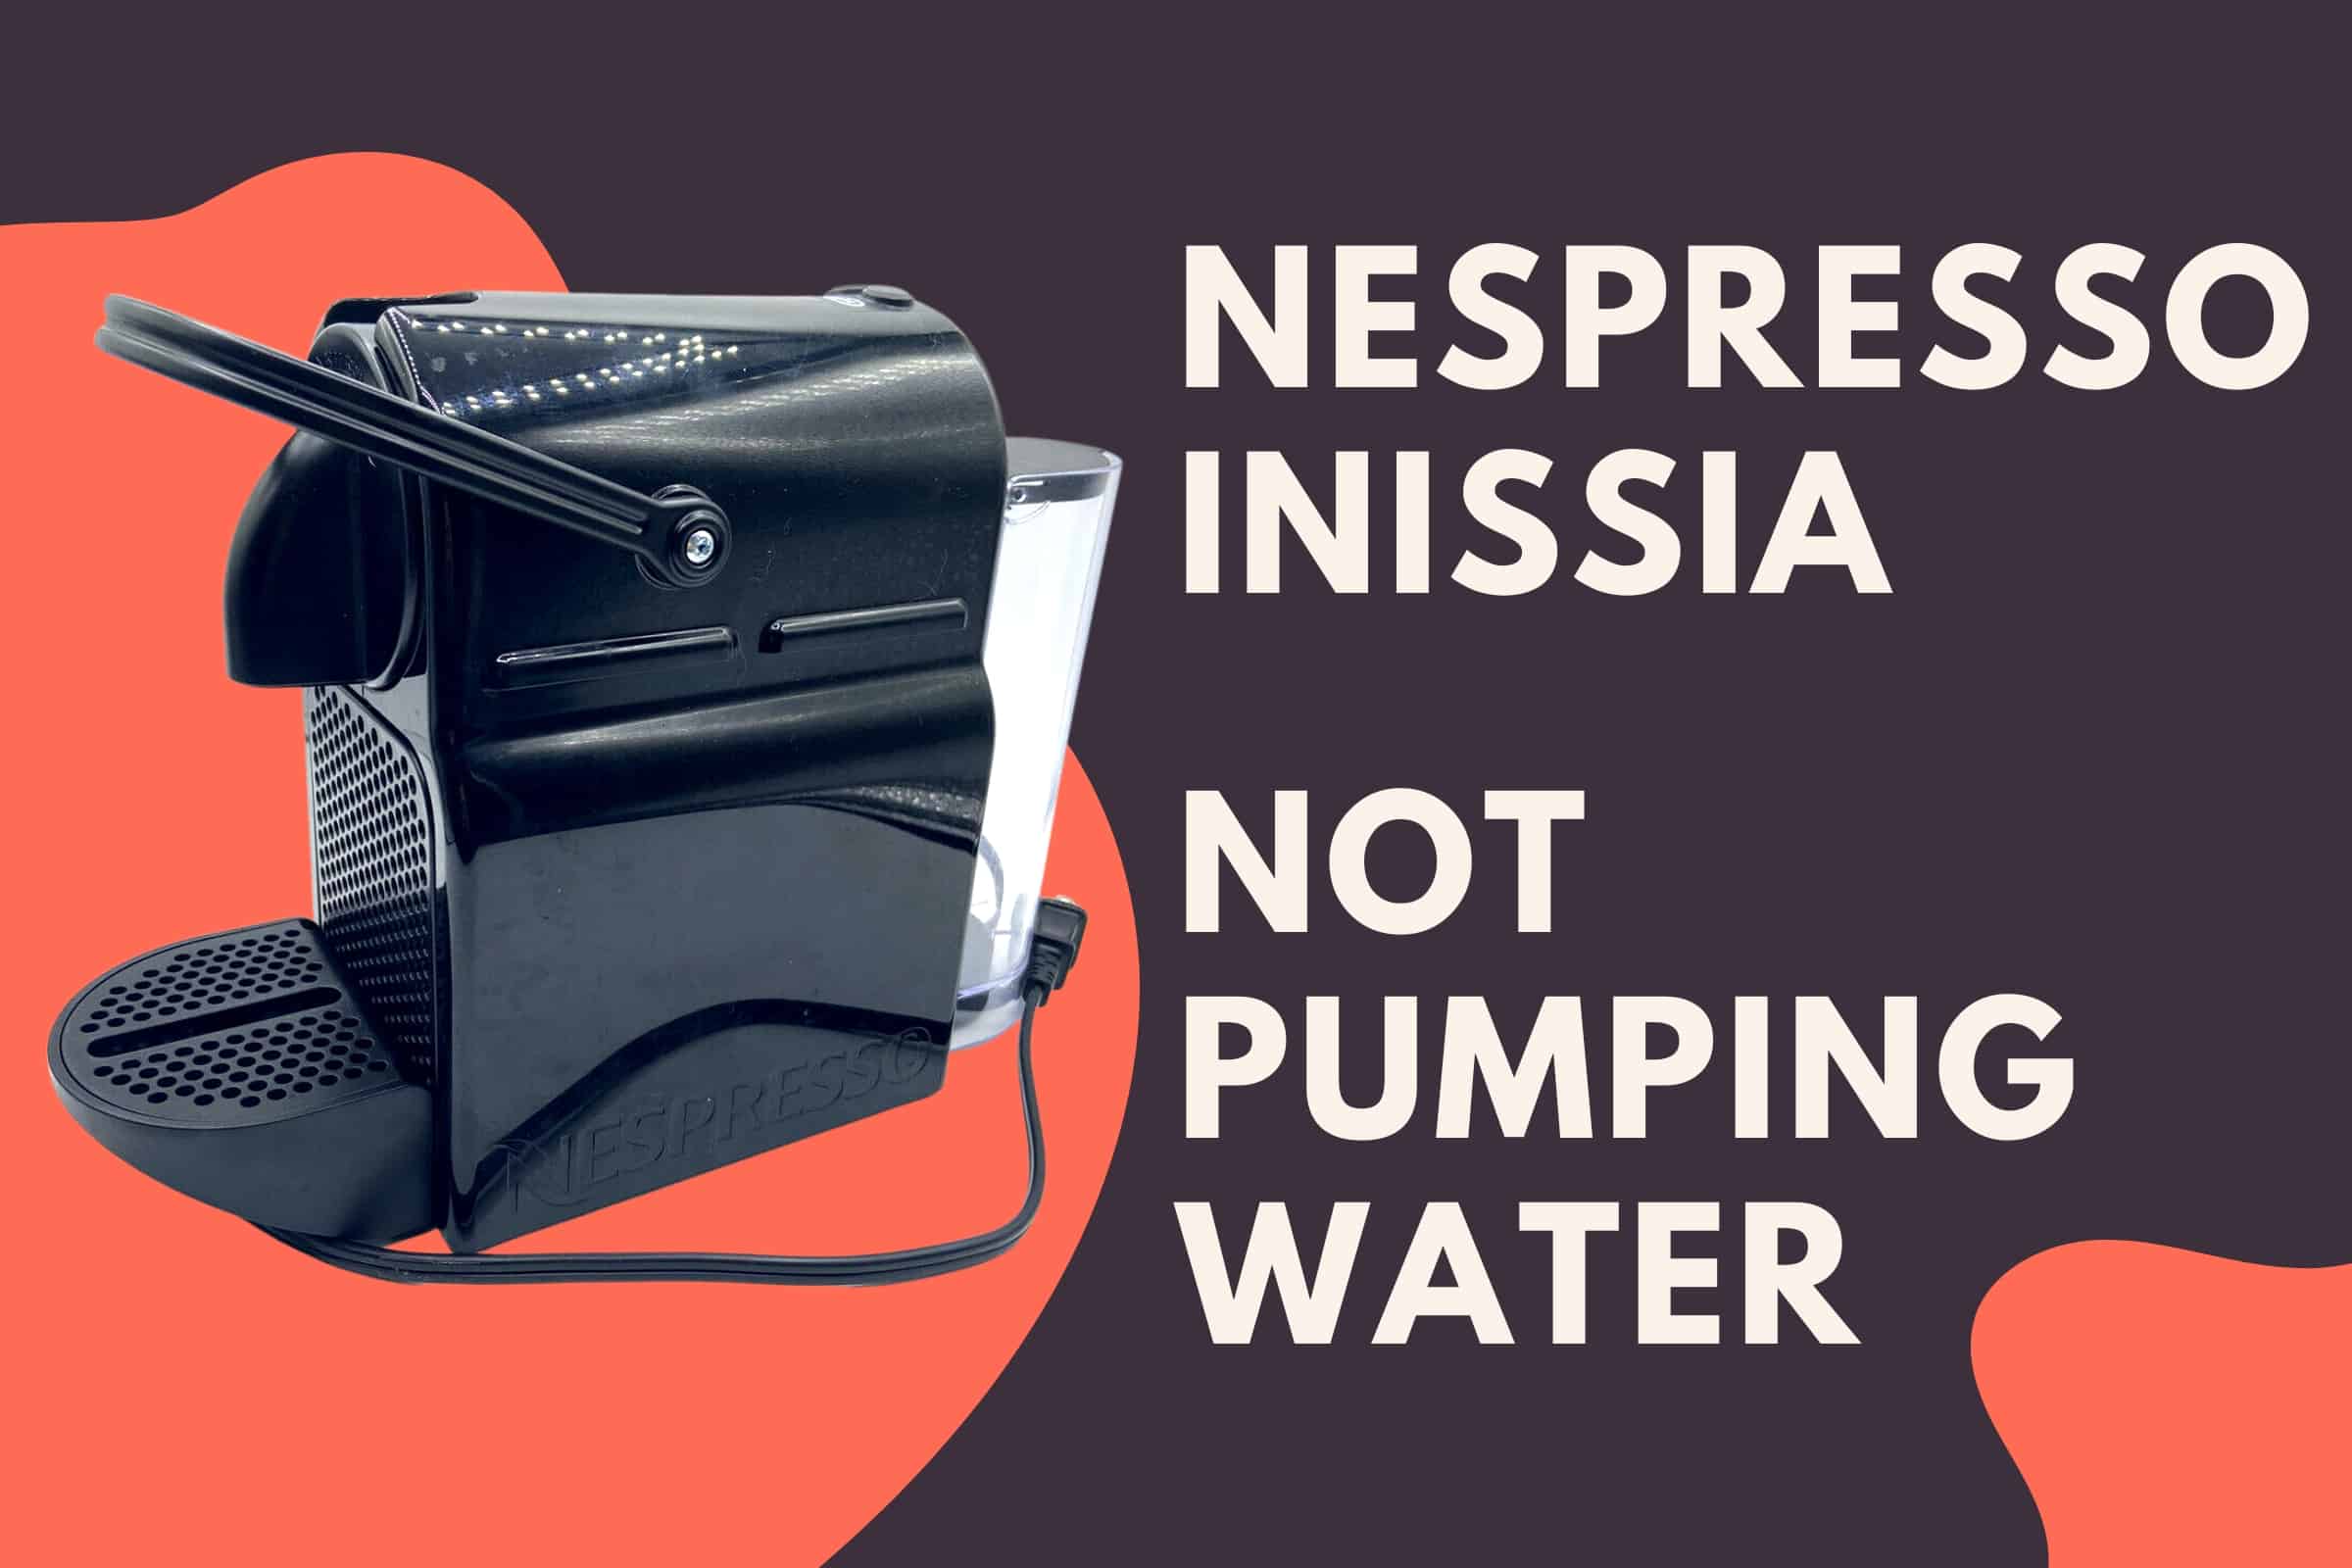 Nespresso inissia not pumping water